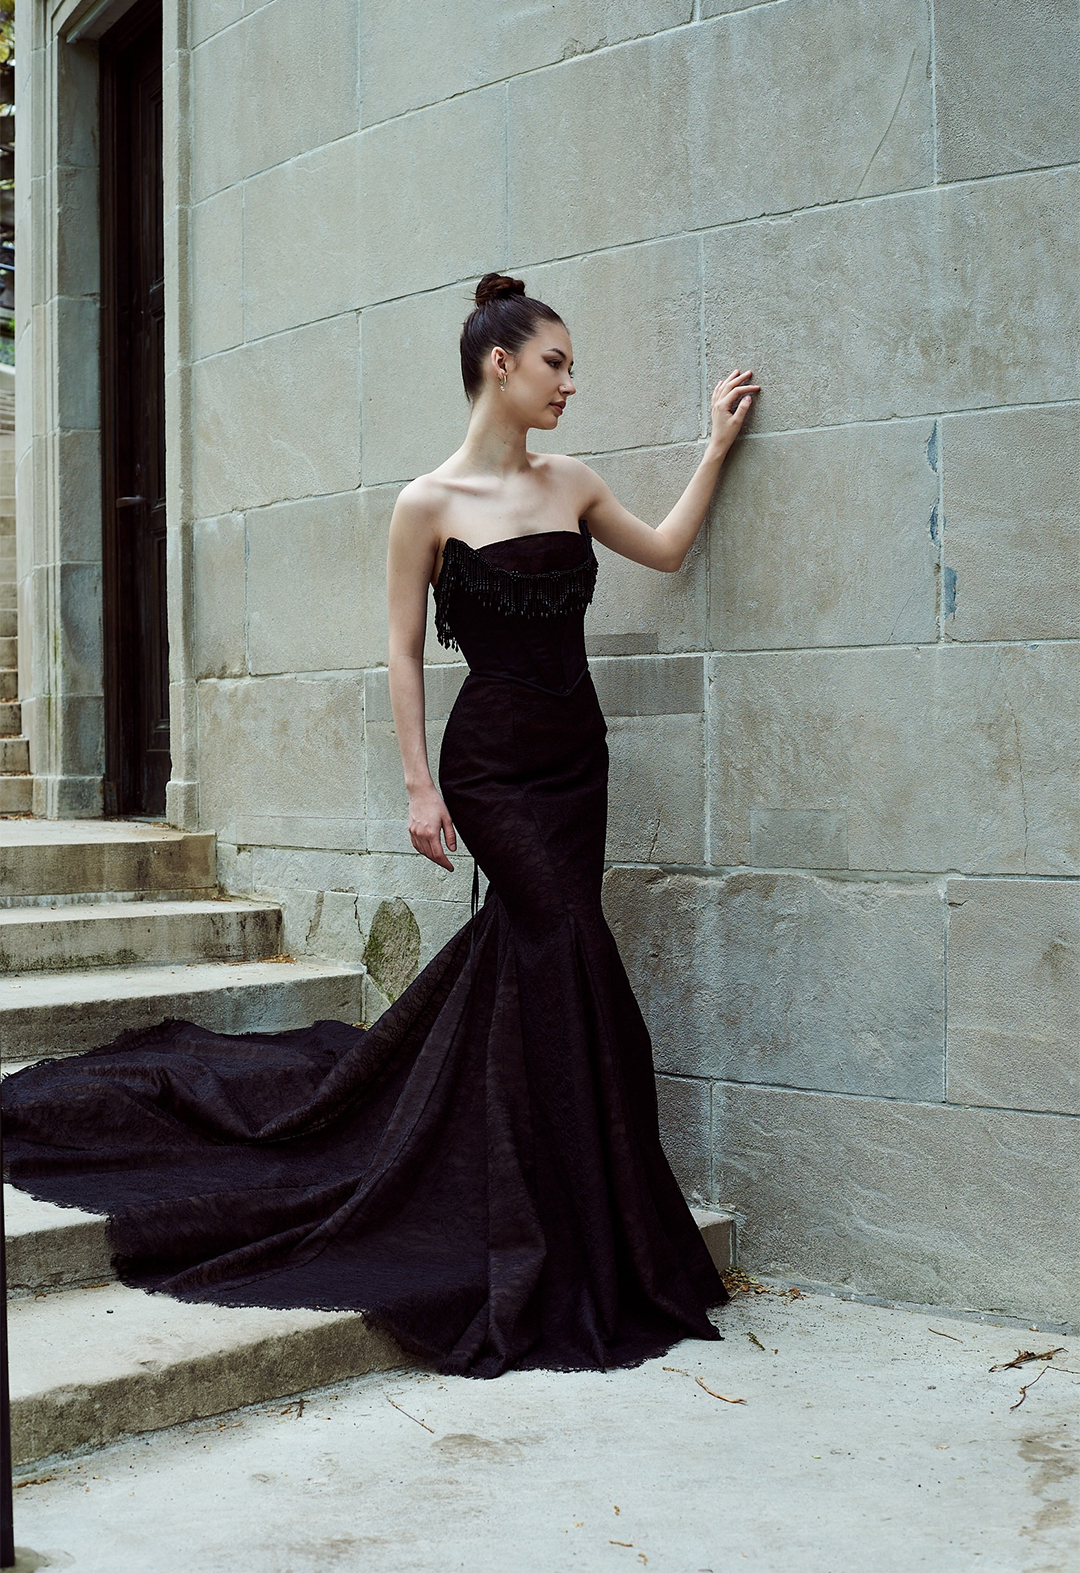 Model walking at a three-quarter angle with one hand on the wall and one hand down. Full body shot with neutral stone background staircase.